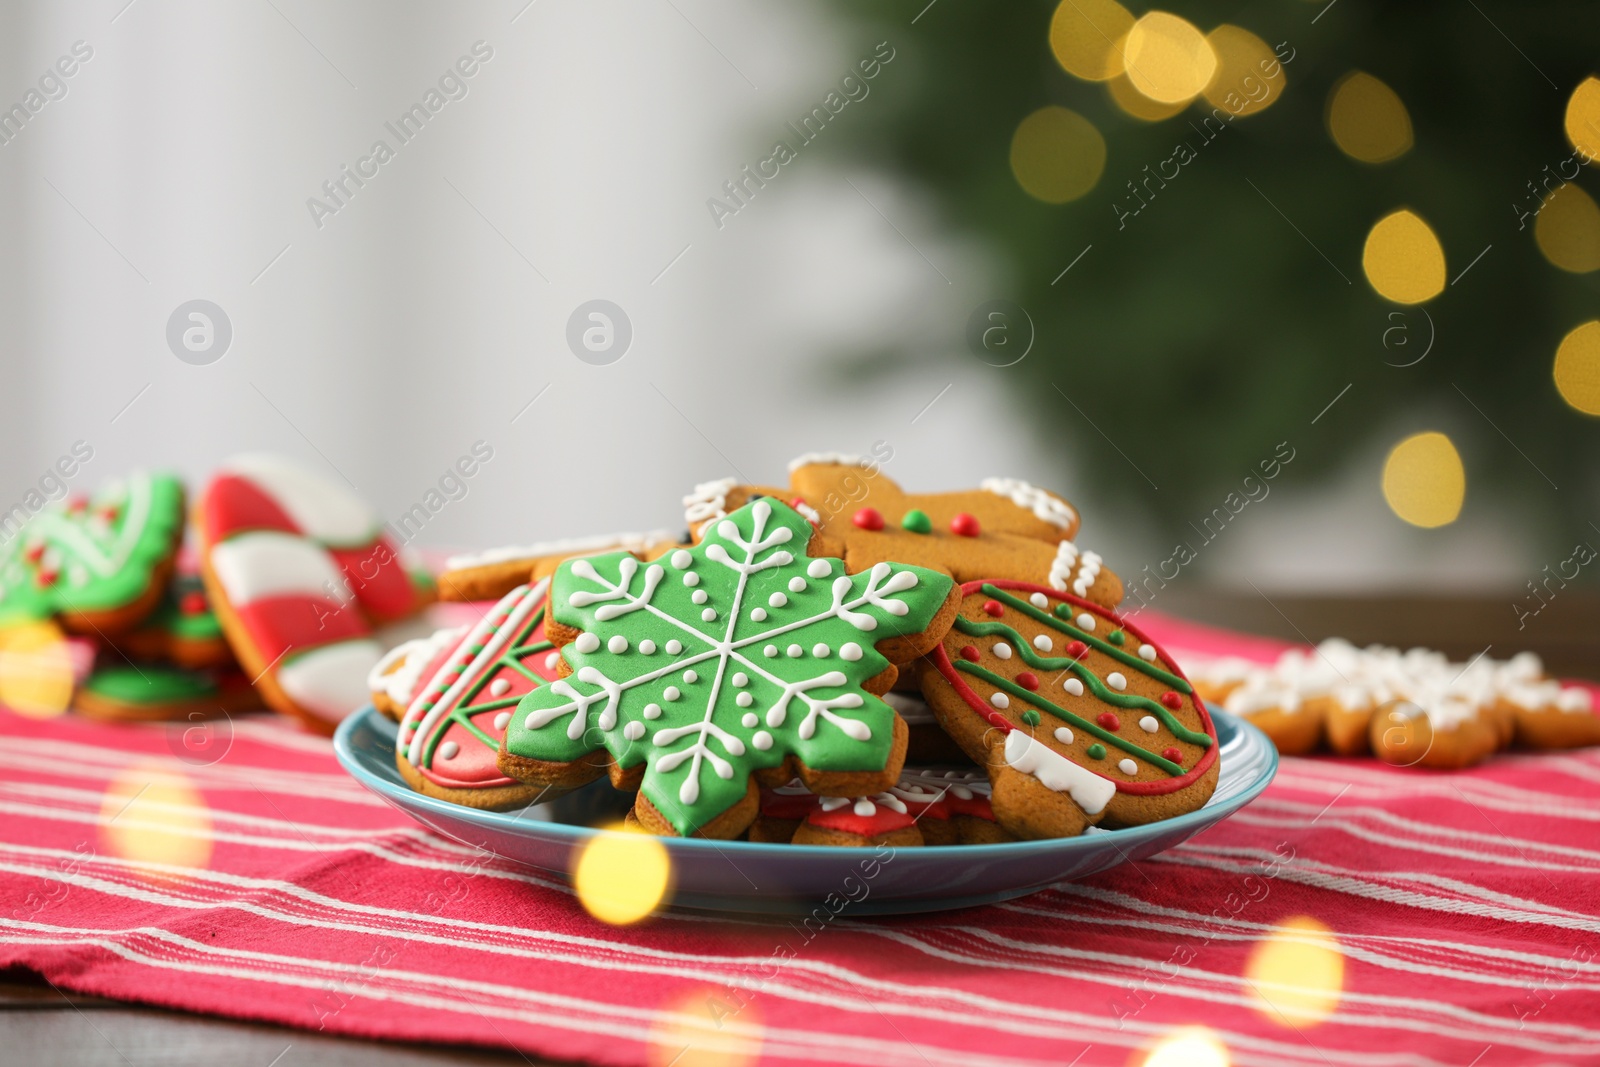 Photo of Decorated cookies on table against blurred Christmas lights